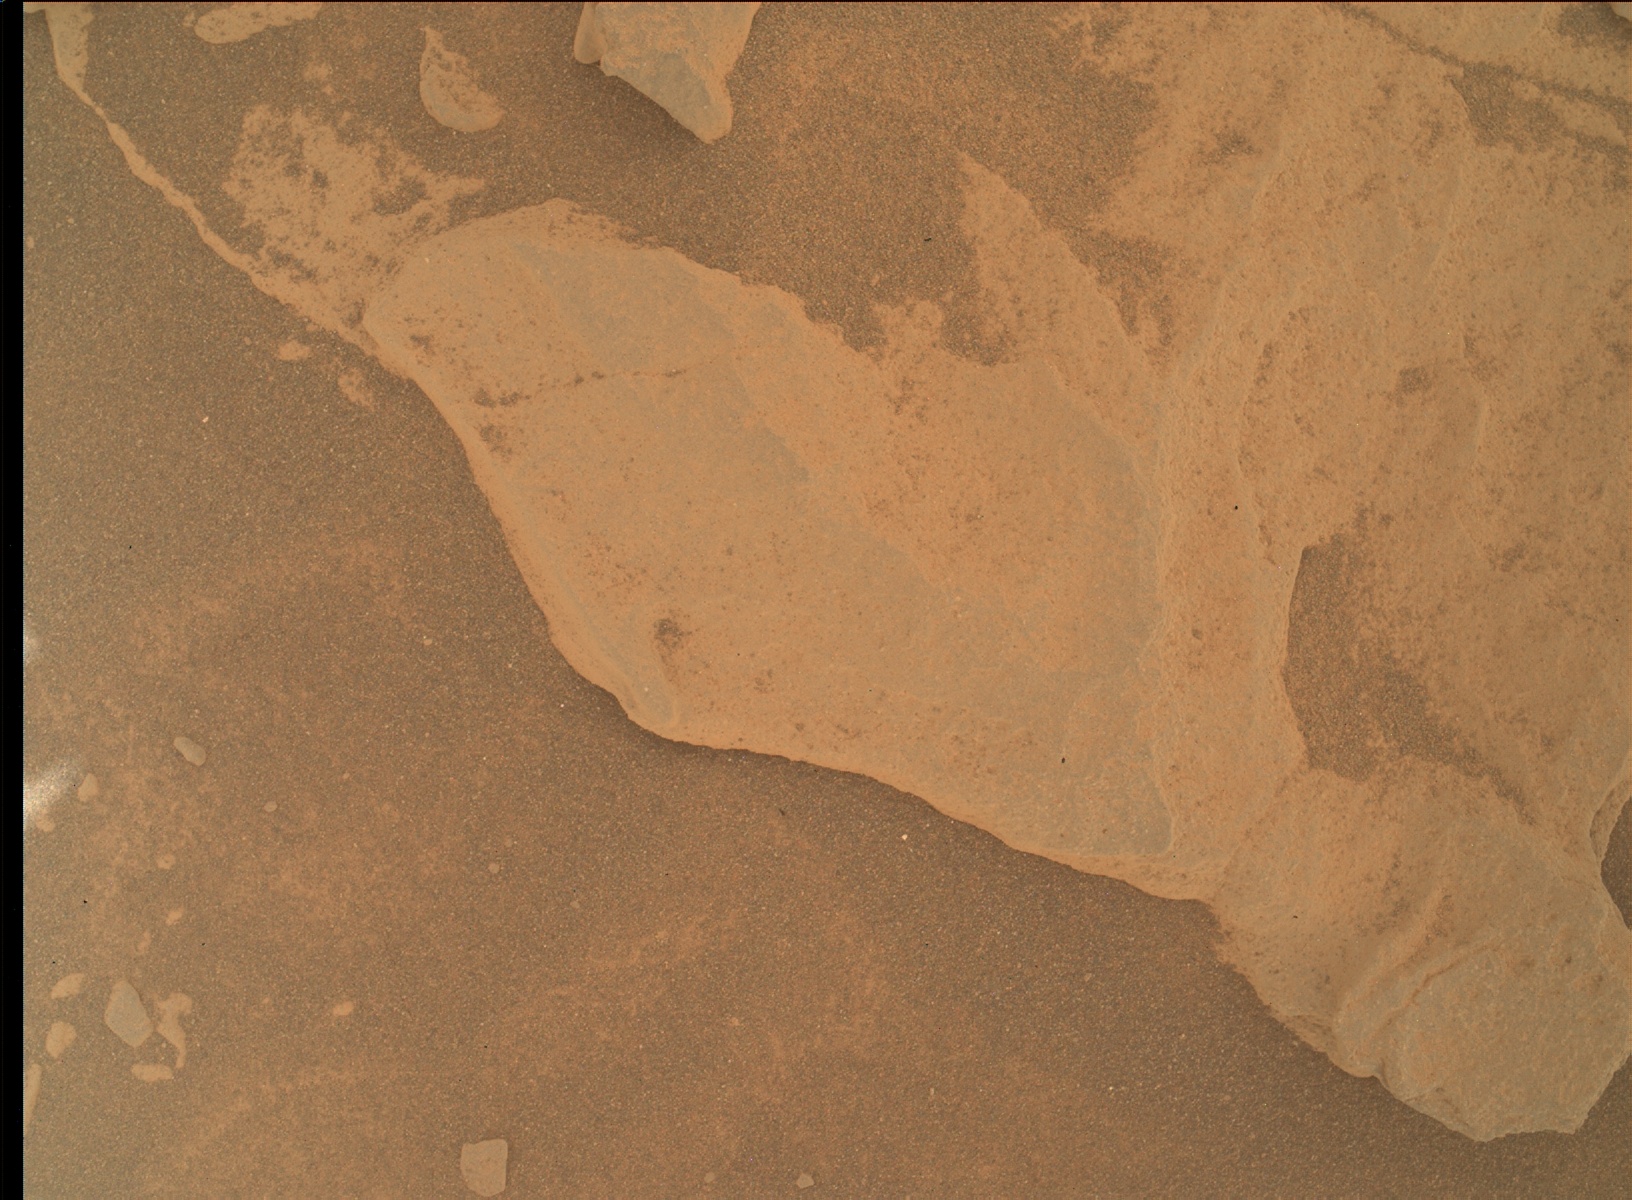 Nasa's Mars rover Curiosity acquired this image using its Mars Hand Lens Imager (MAHLI) on Sol 3413